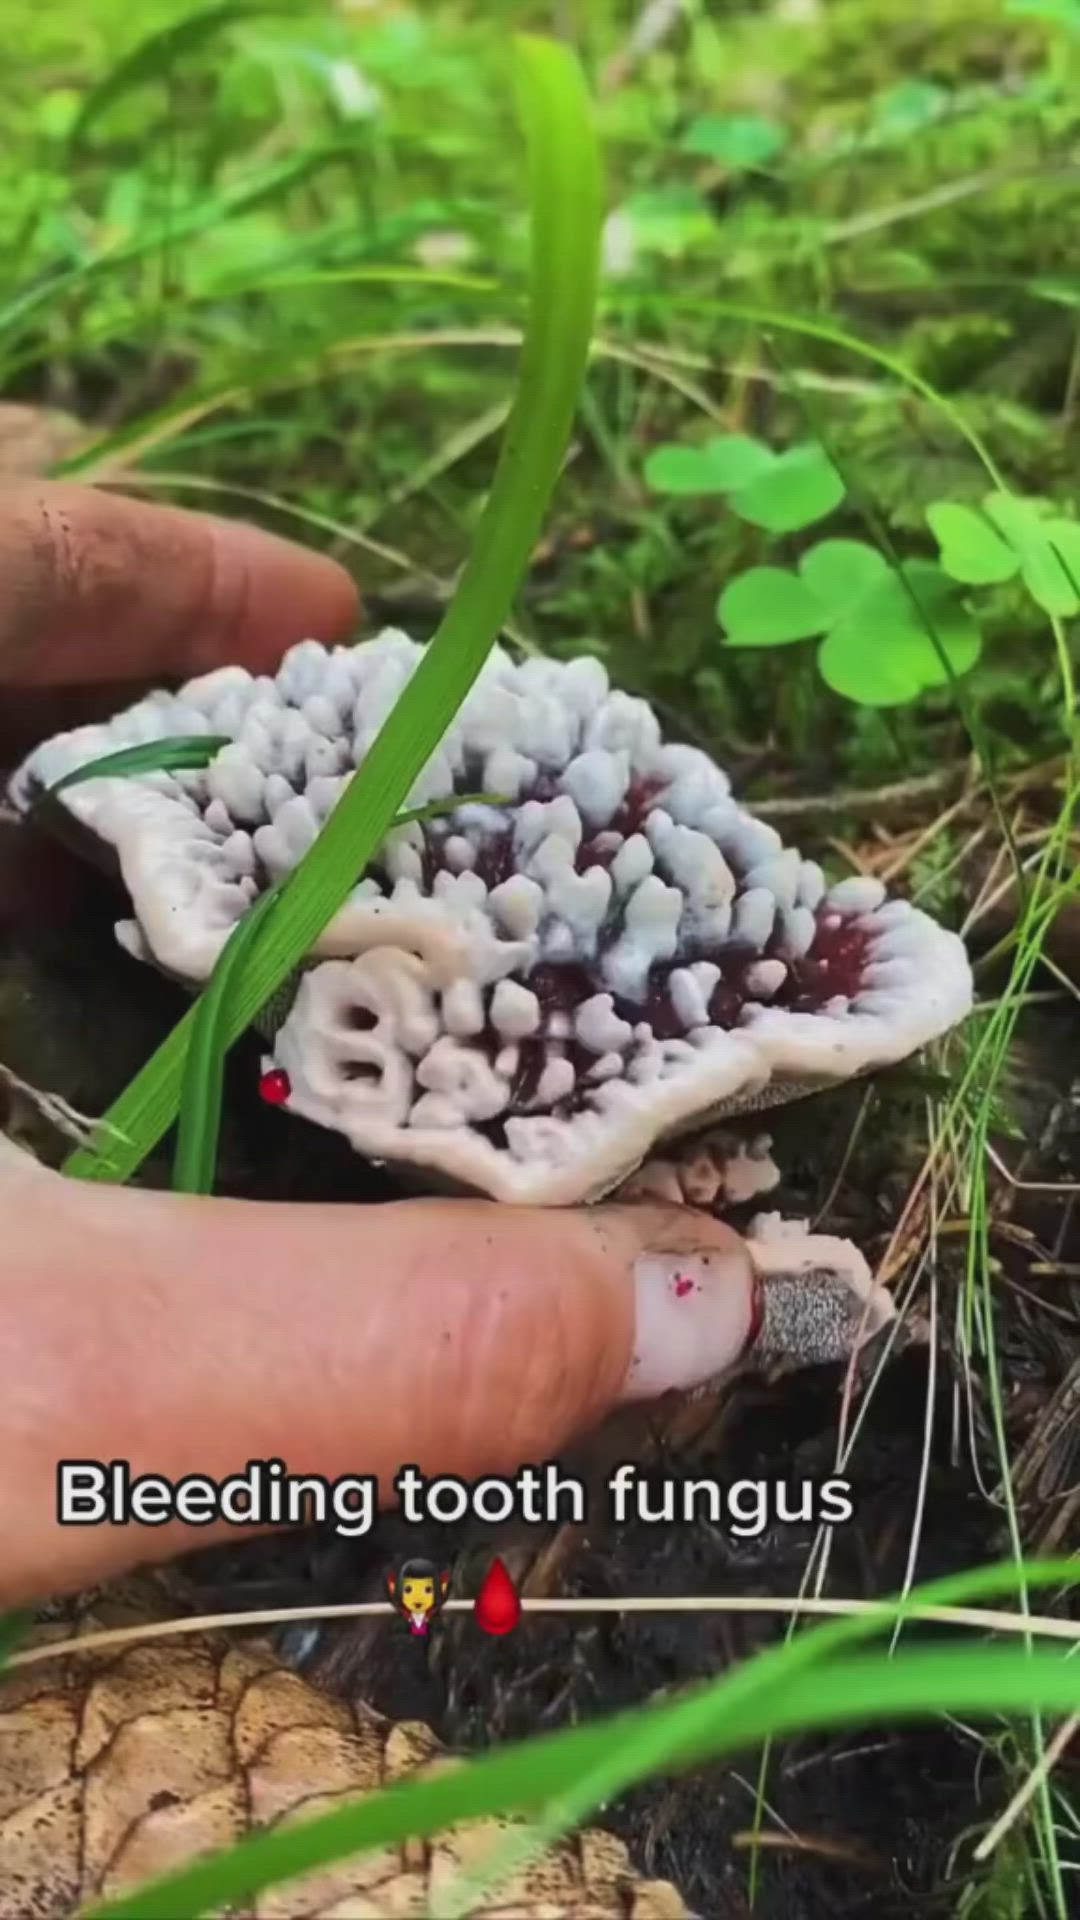 This contains an image of: Ever heard of the Bleeding Tooth Fungus?